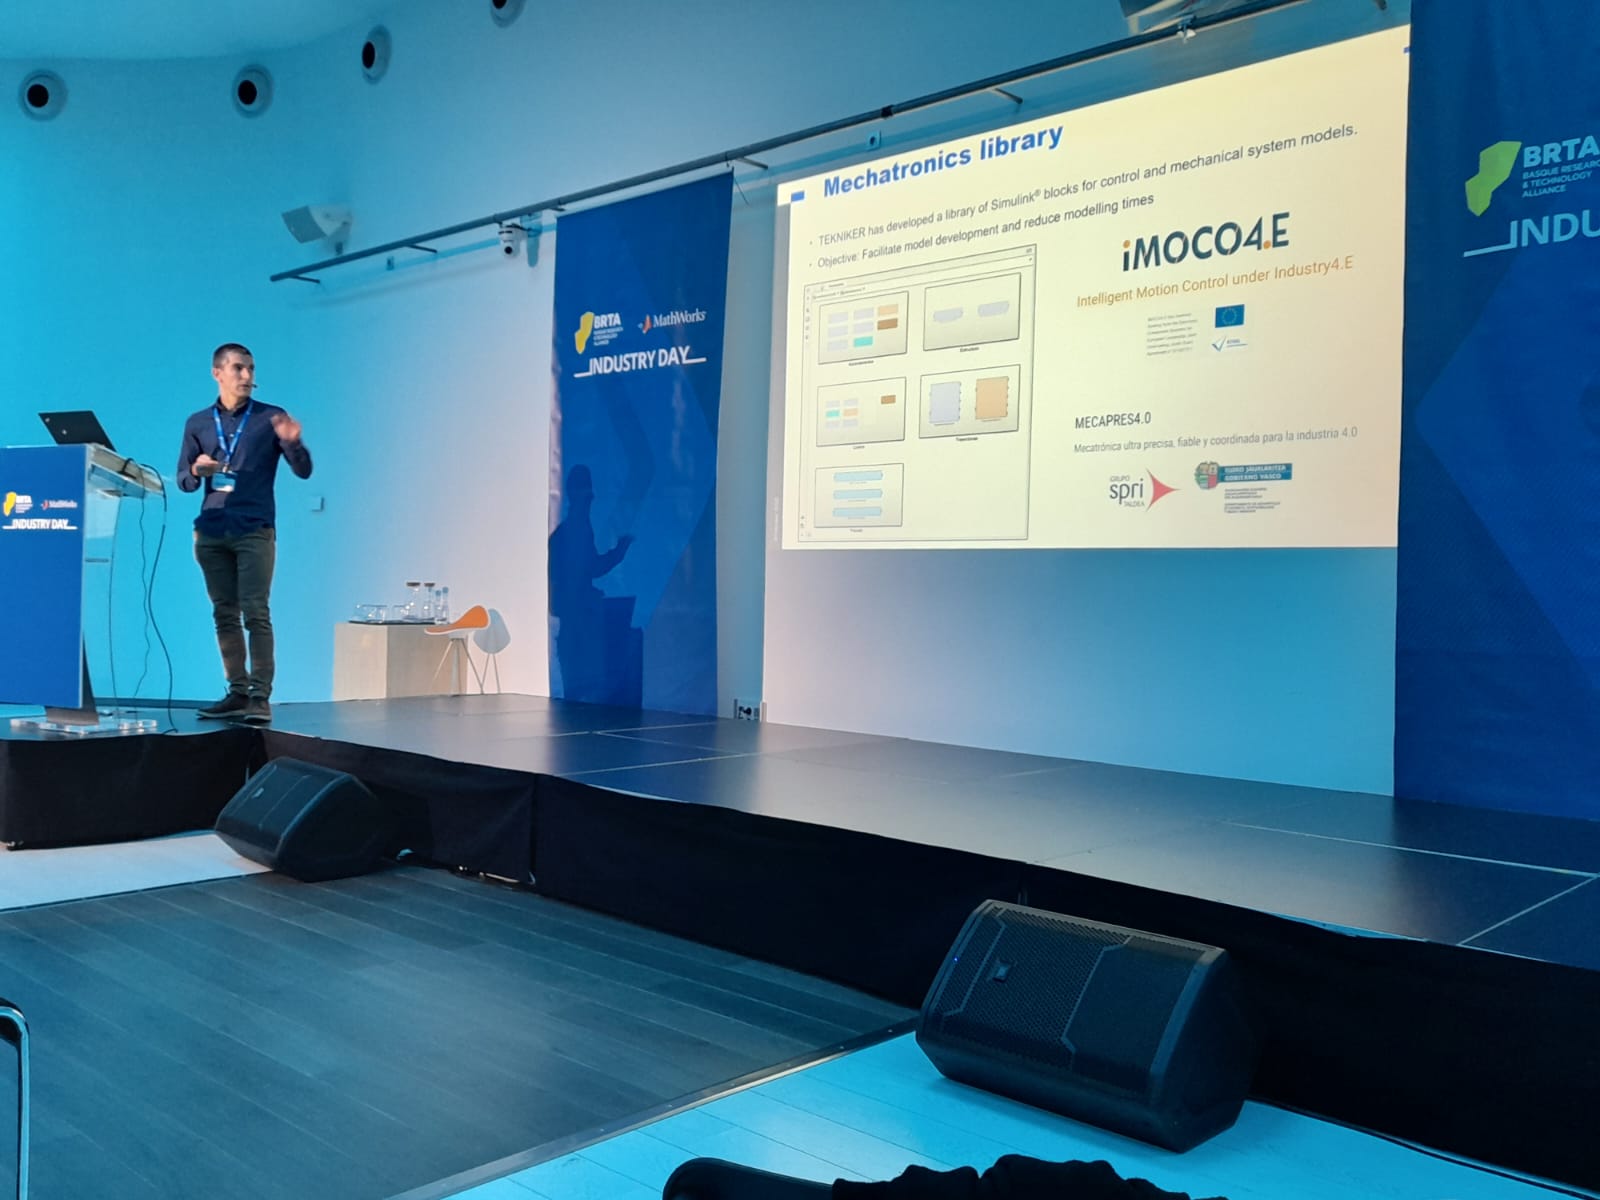 IMOCO4.E at the Mathworks Industry Day